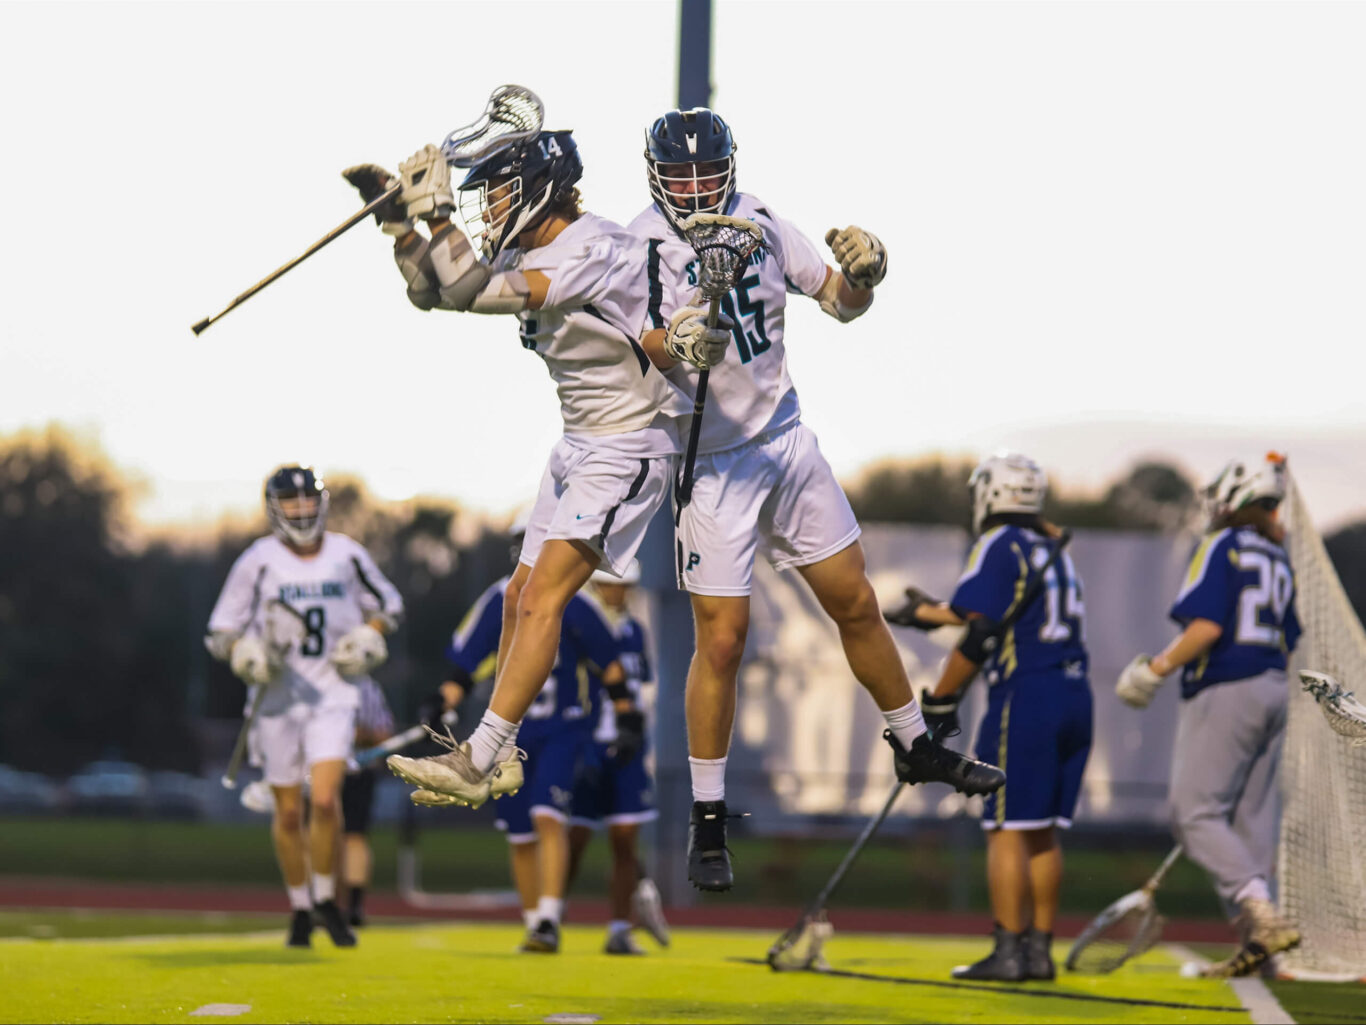 Two lacrosse players celebrating a goal during a game played by boys.